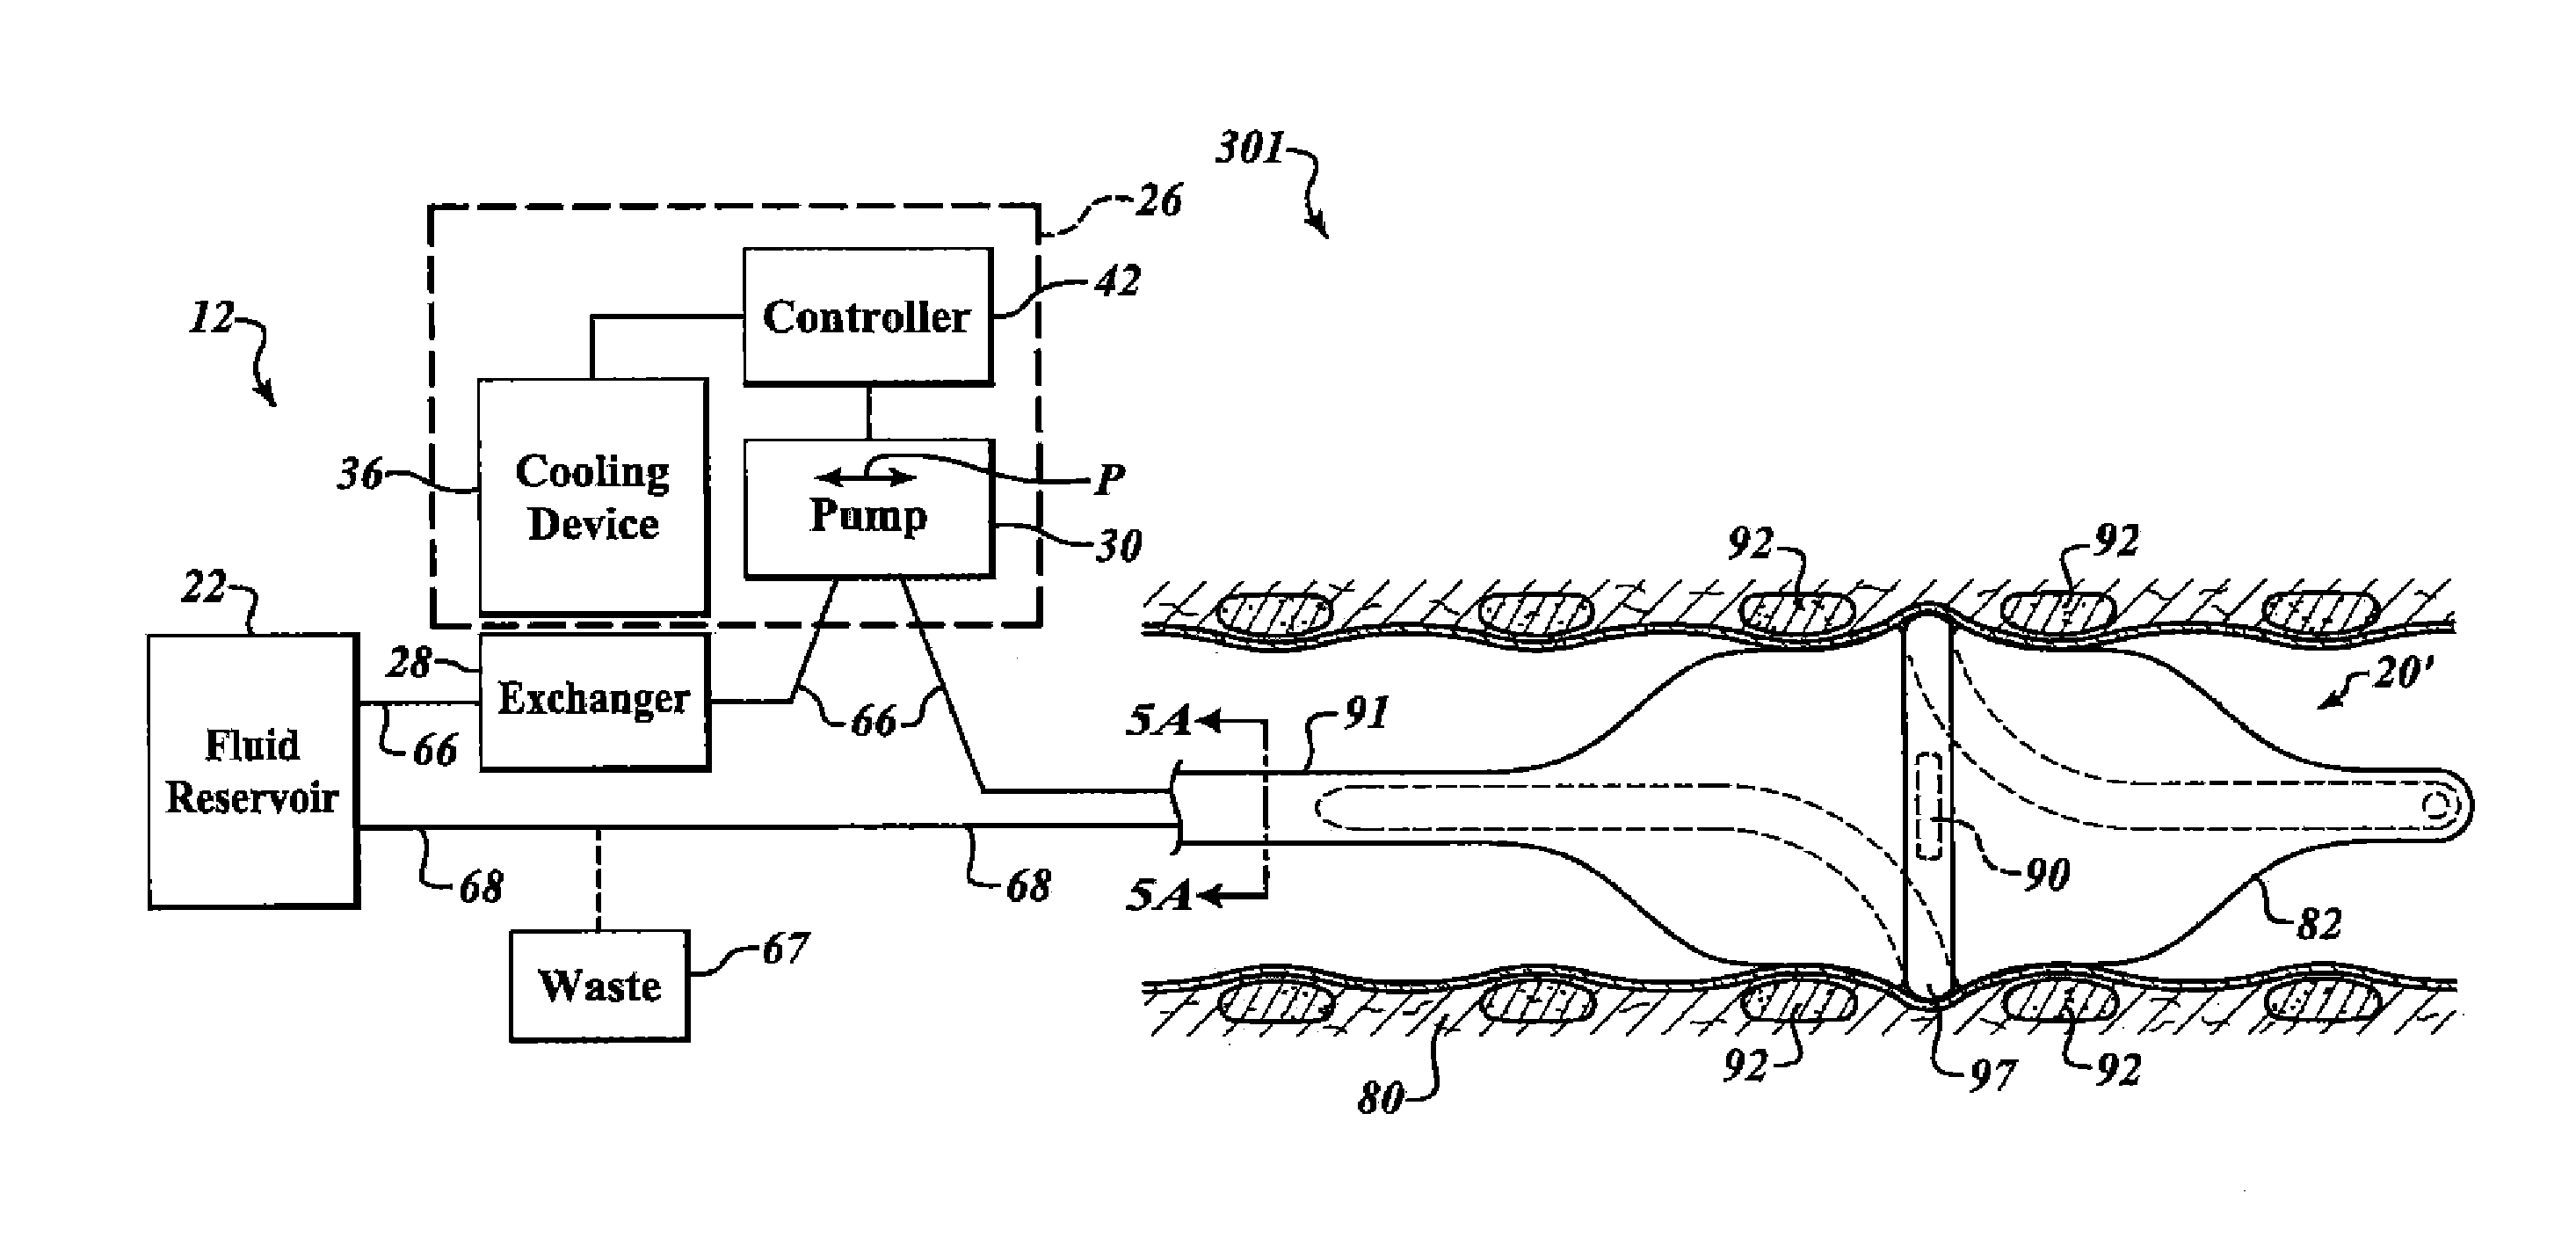 Fluid delivery system and method for treatment